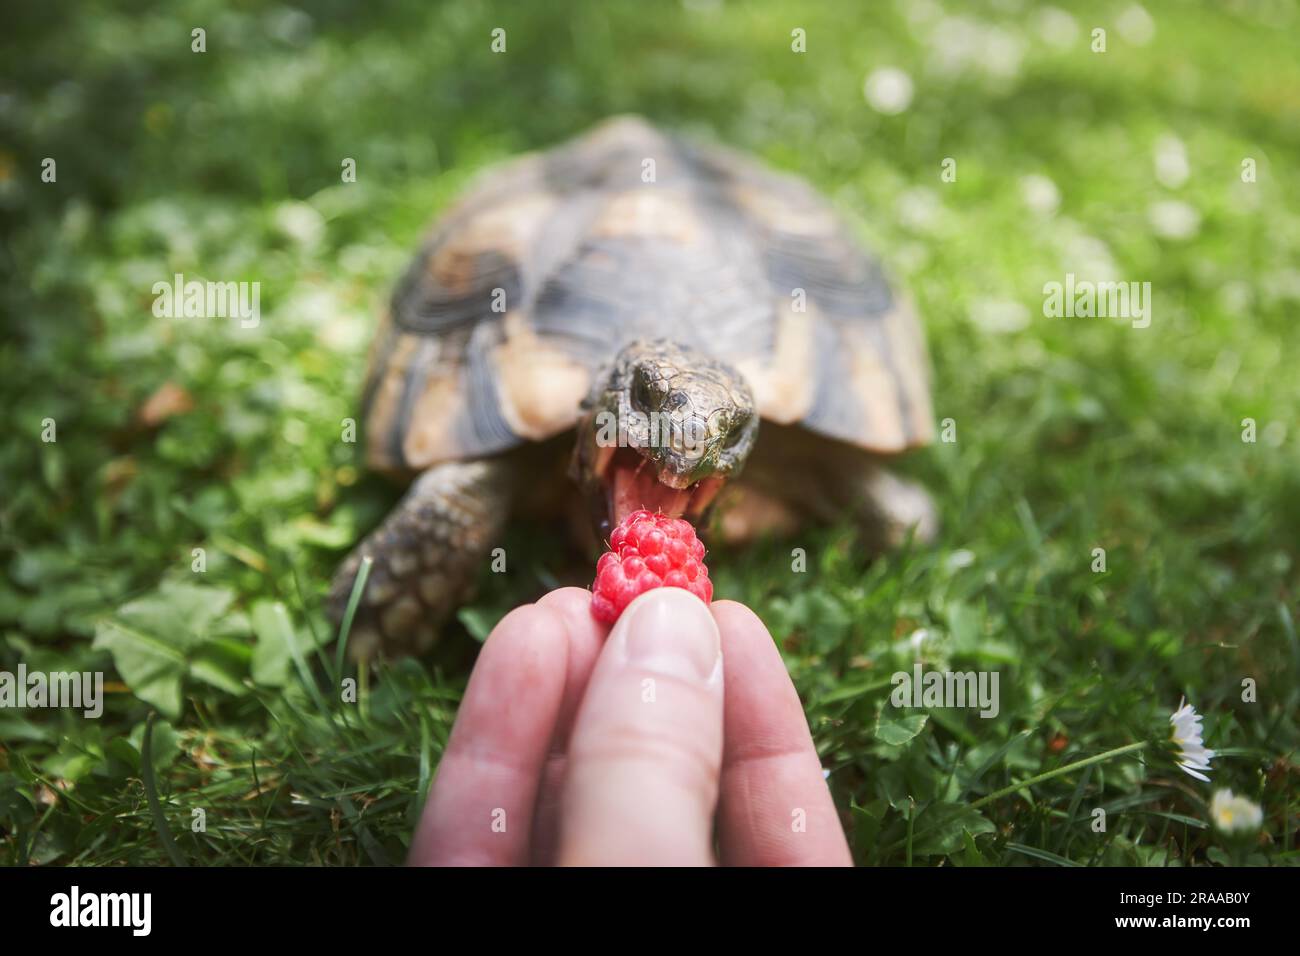 Pet owner giving his turtle ripe raspberry to eat in grass on back yard. Summertime and domestic life with exotic pets. Stock Photo